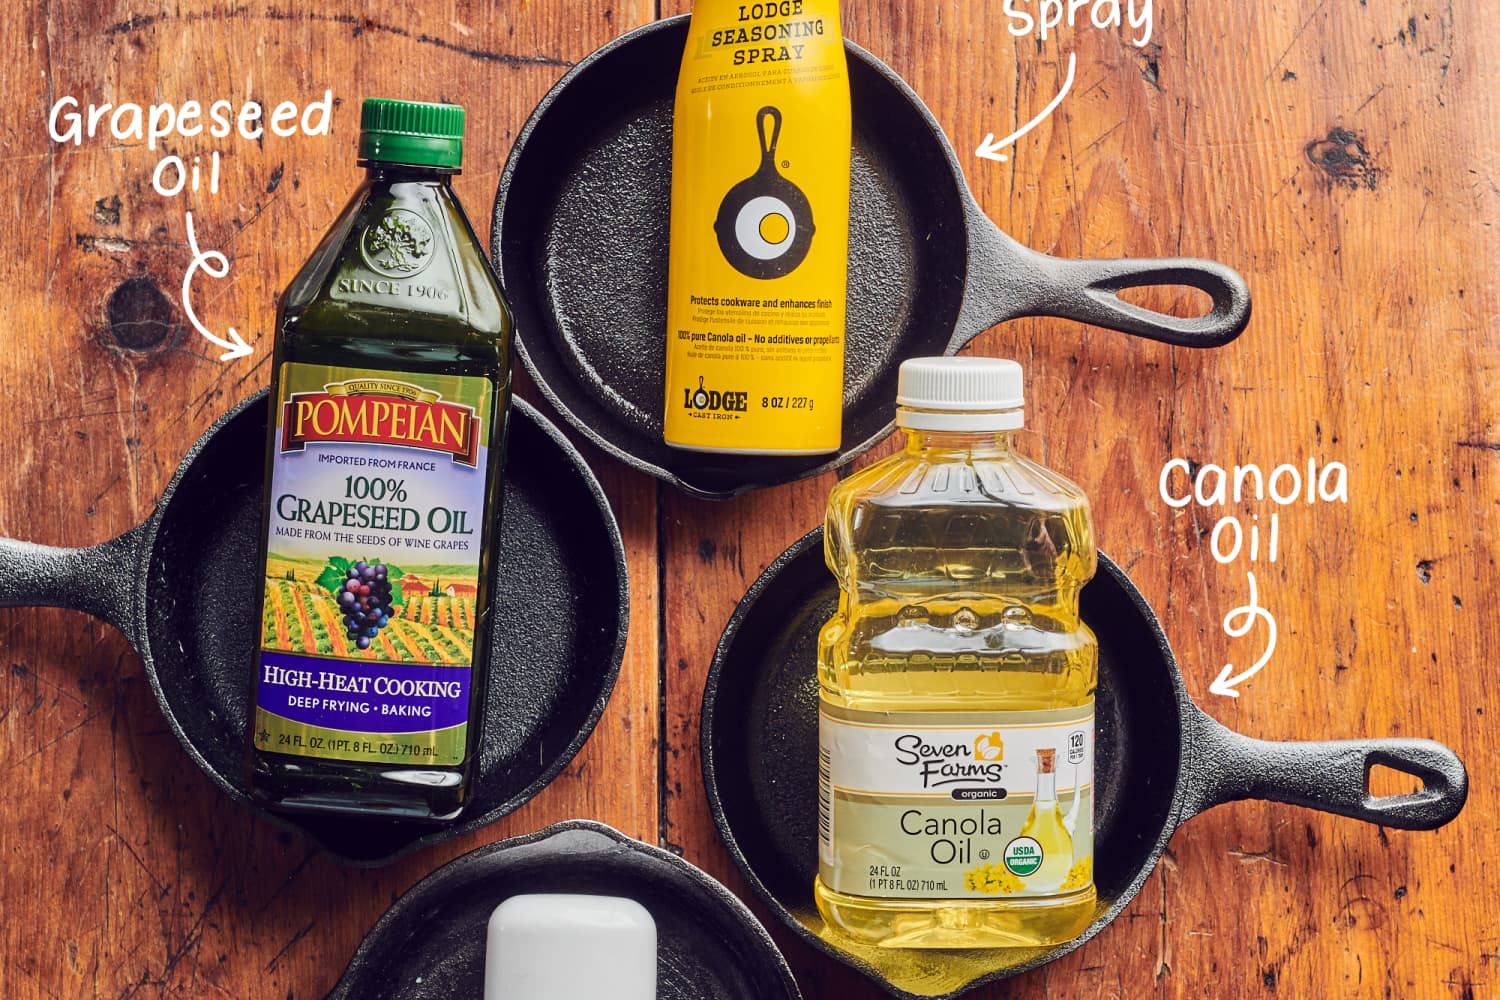 What are neutral oils? Here's what to know and how to cook with